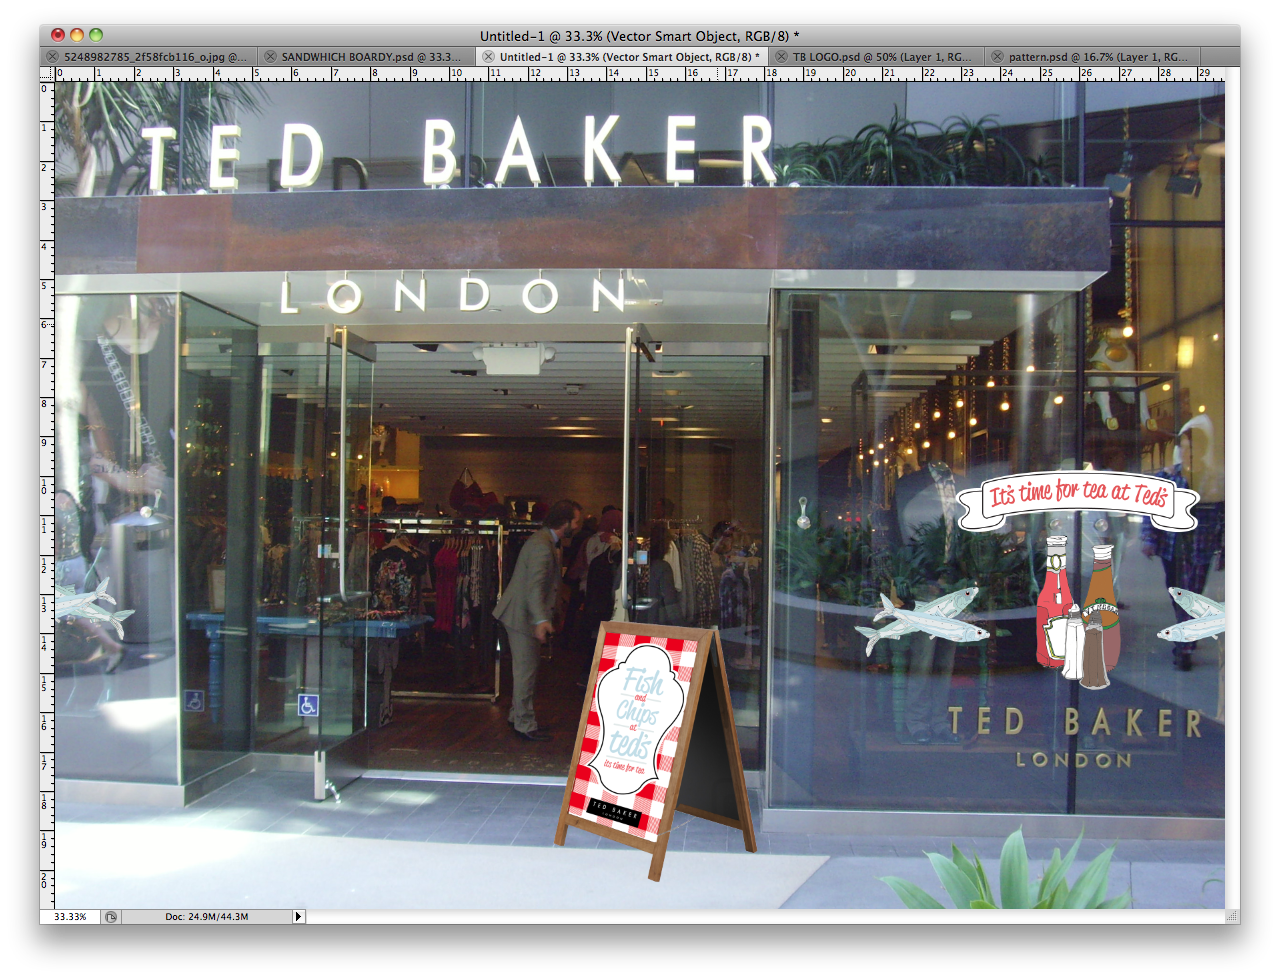 Design Practice: Re-designing the store front.